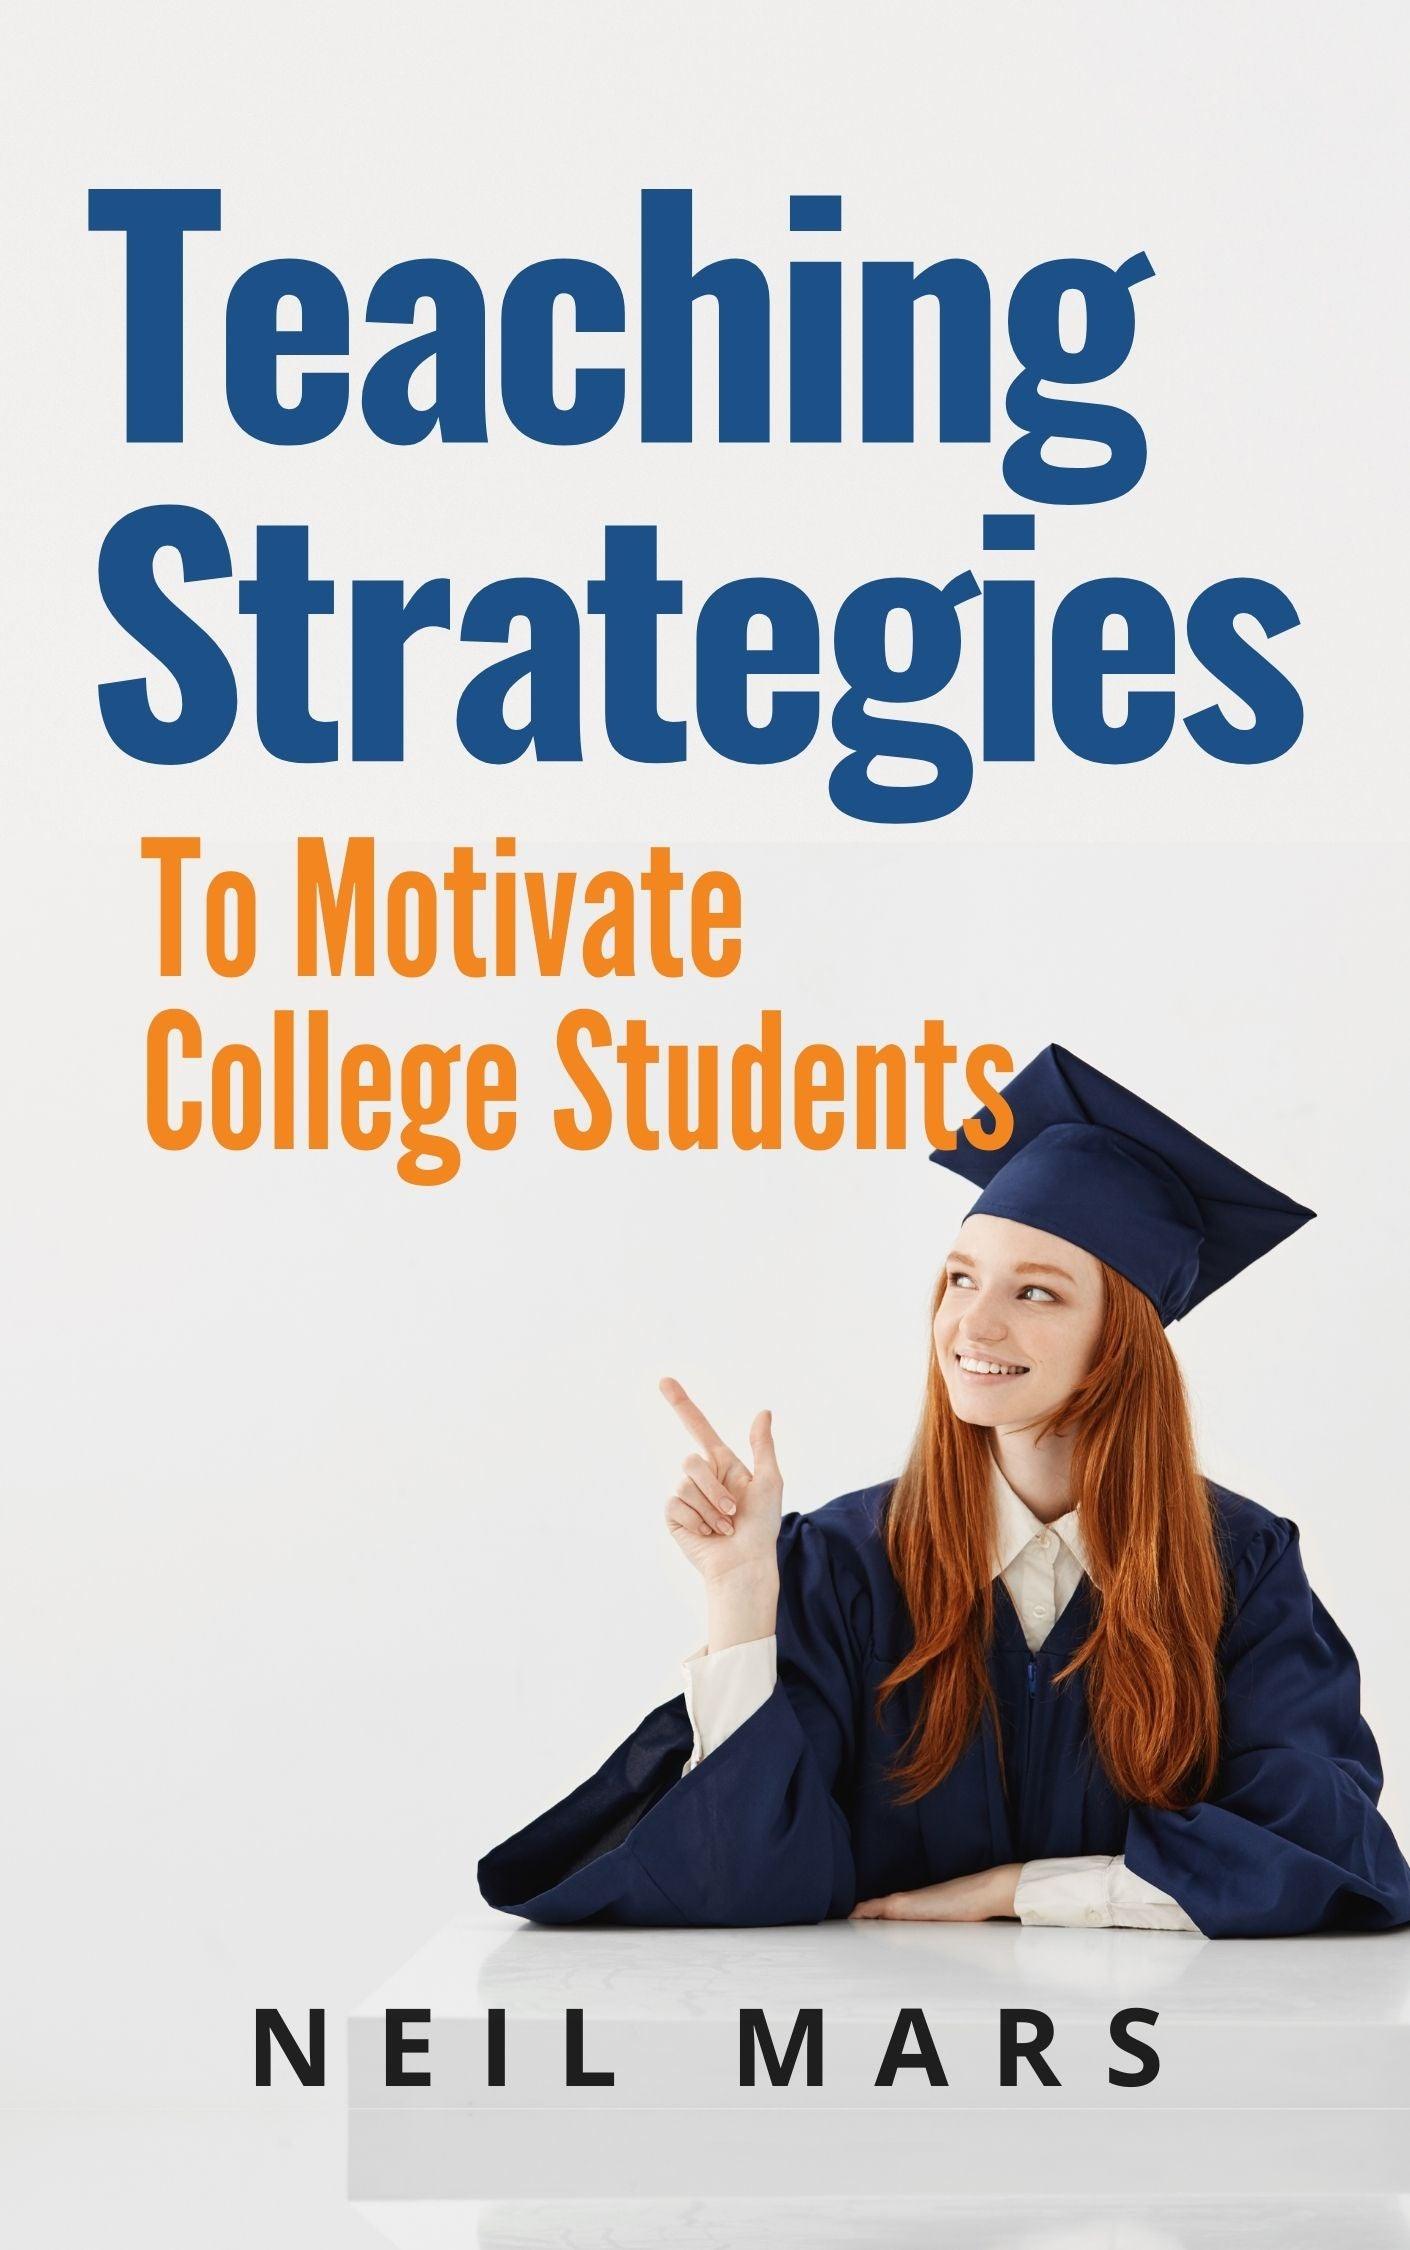 Teaching Strategies to Motivate College Students - 22 Lions